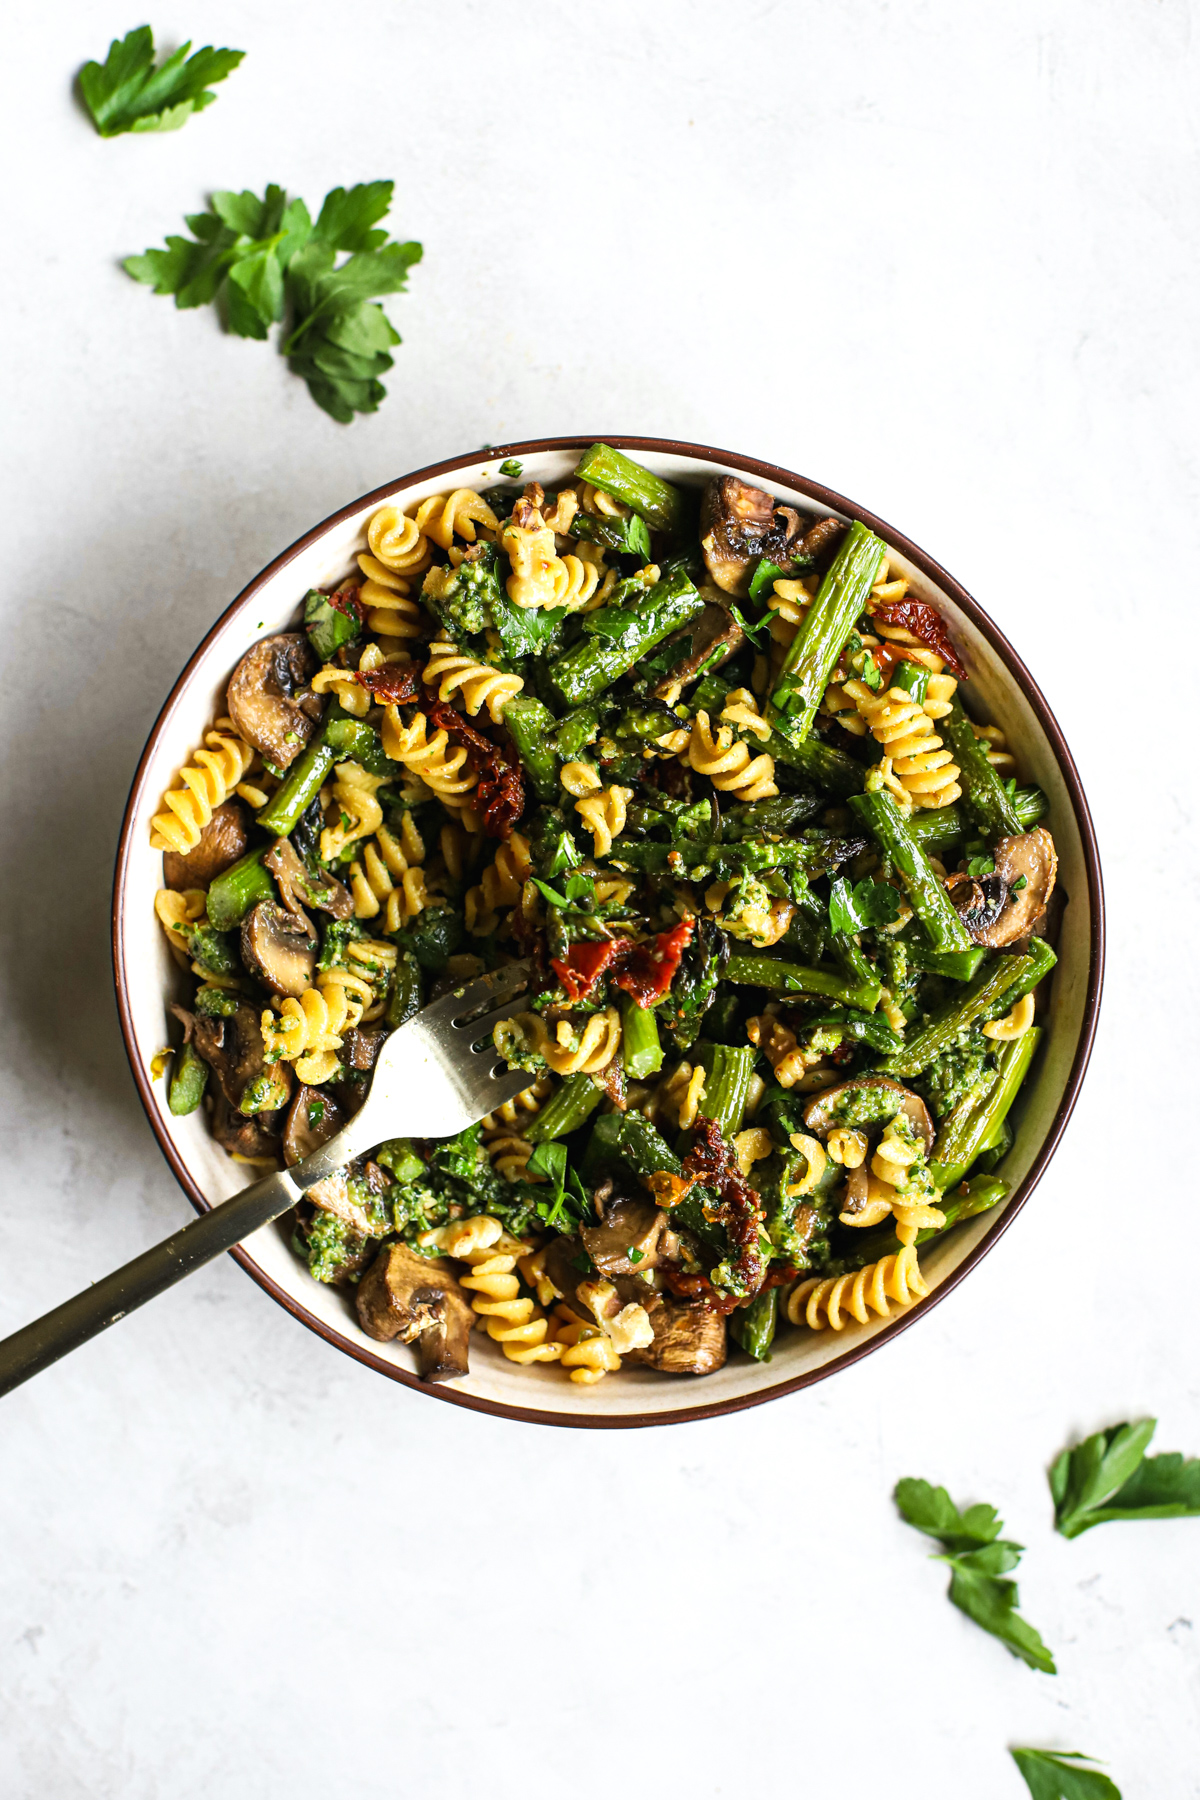 Pesto pasta with spring roasted veggies in beige bowl with golden fork on gray and white surface with parsley sprinkled around